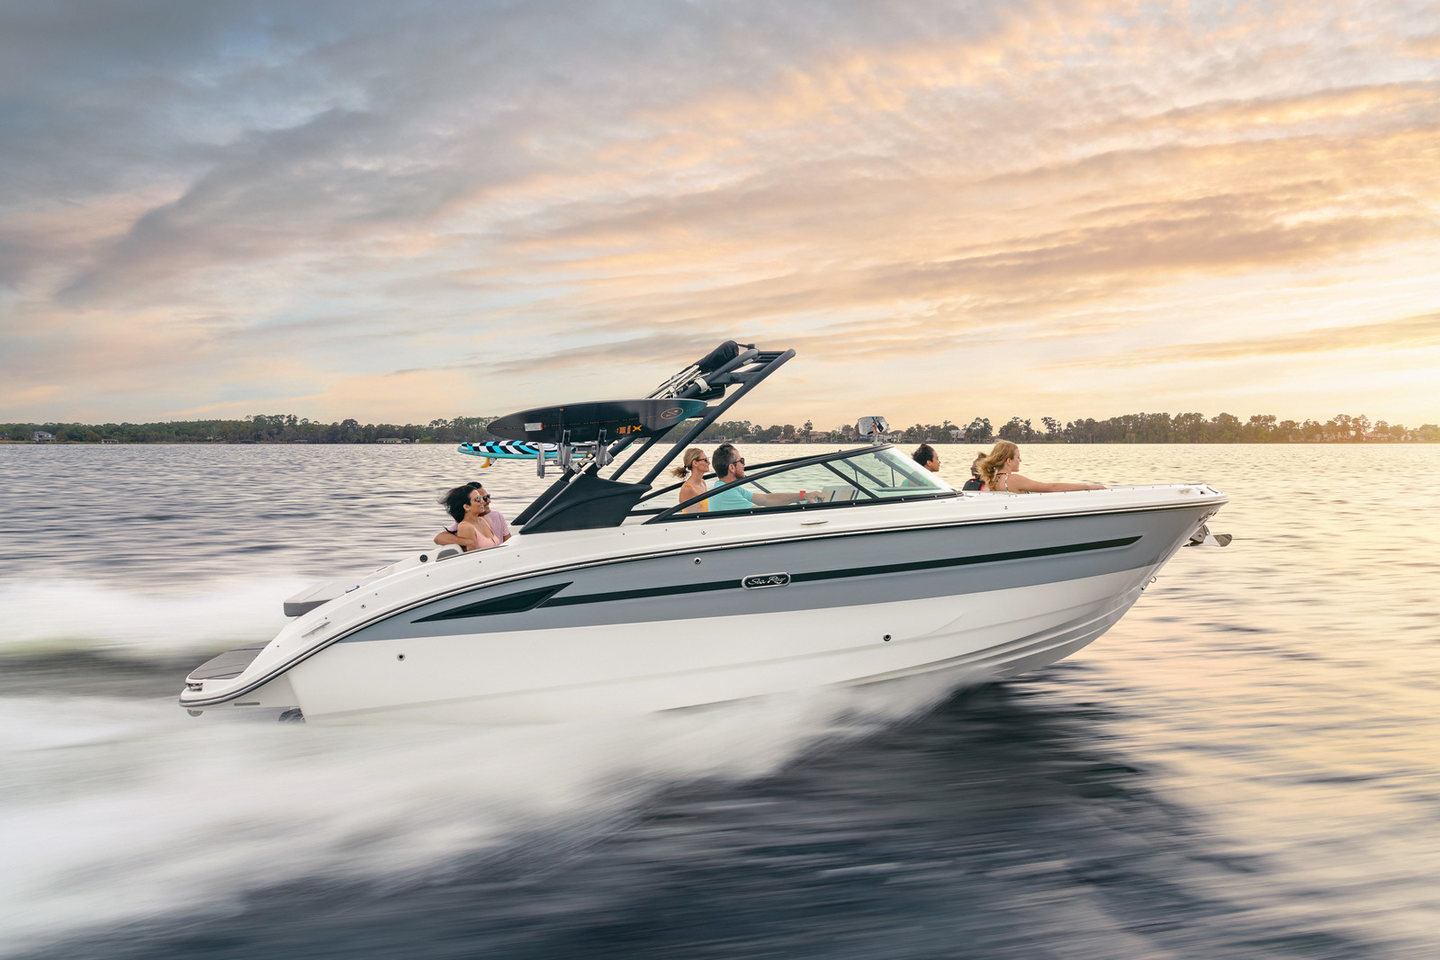 360 VR Virtual Tours of the Sea Ray SDX 270 Surf